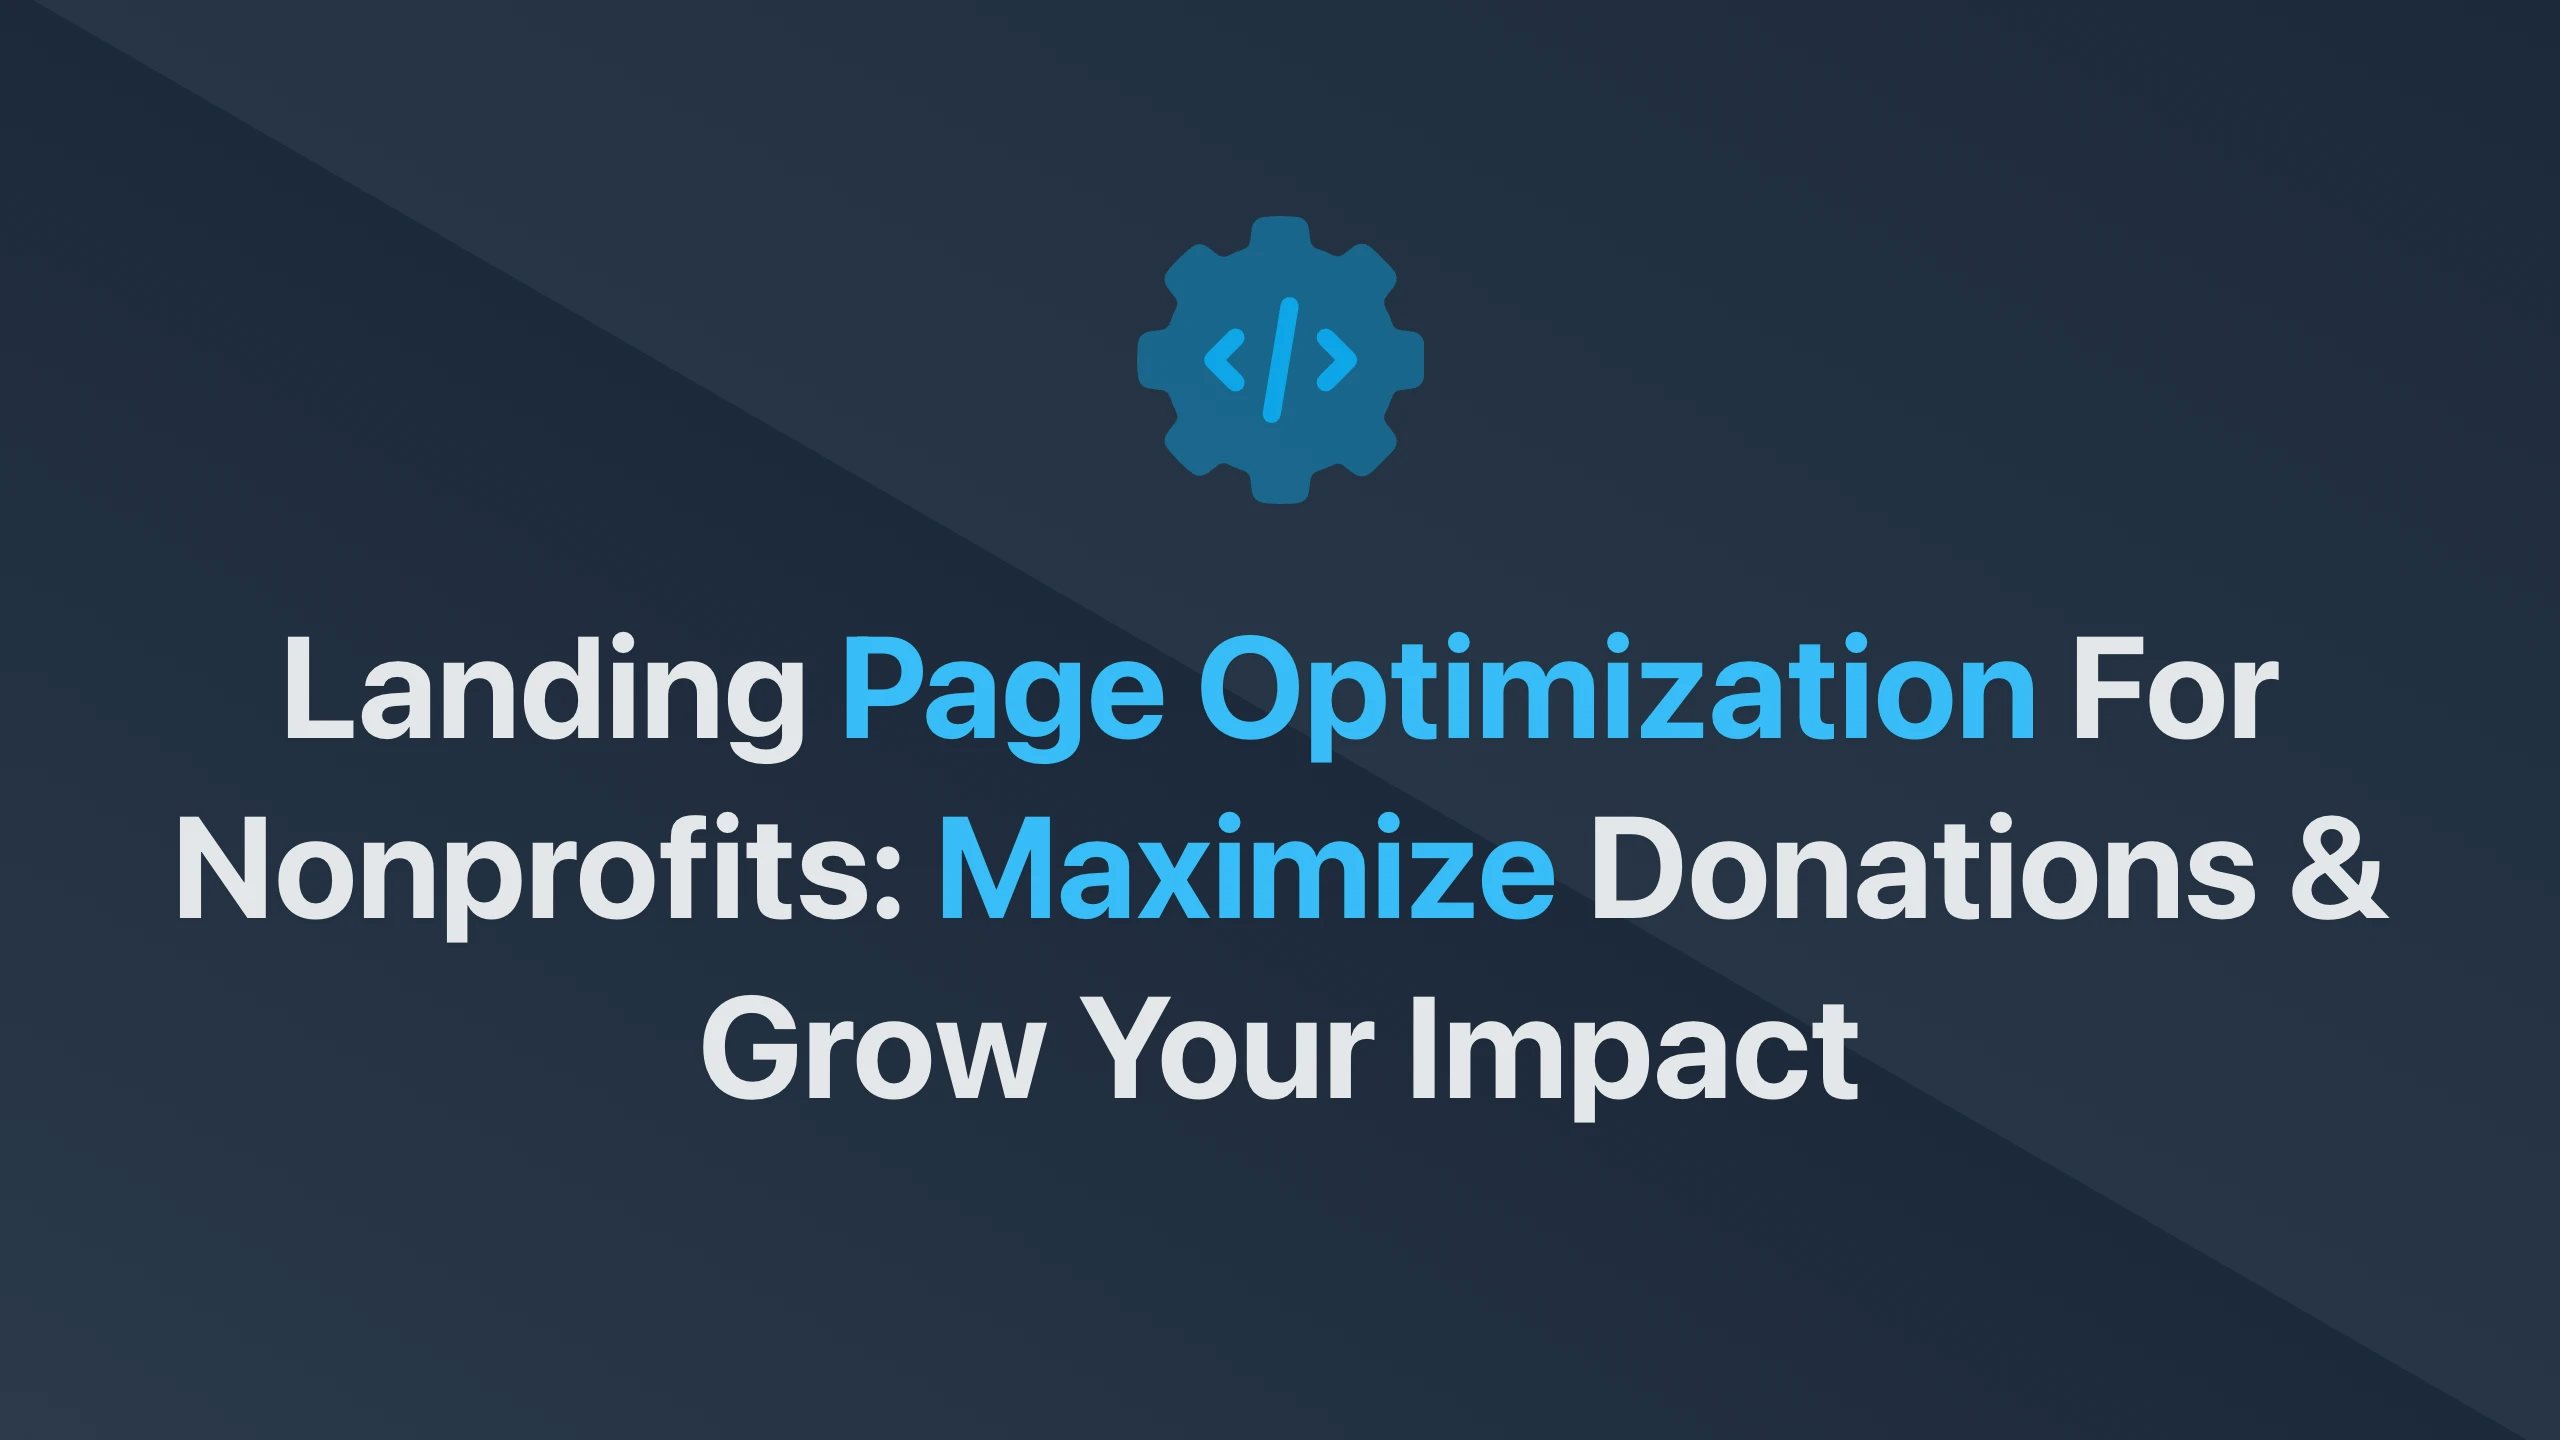 Cover Image for Landing Page Optimization for Nonprofits: Maximize Donations & Grow Your Impact